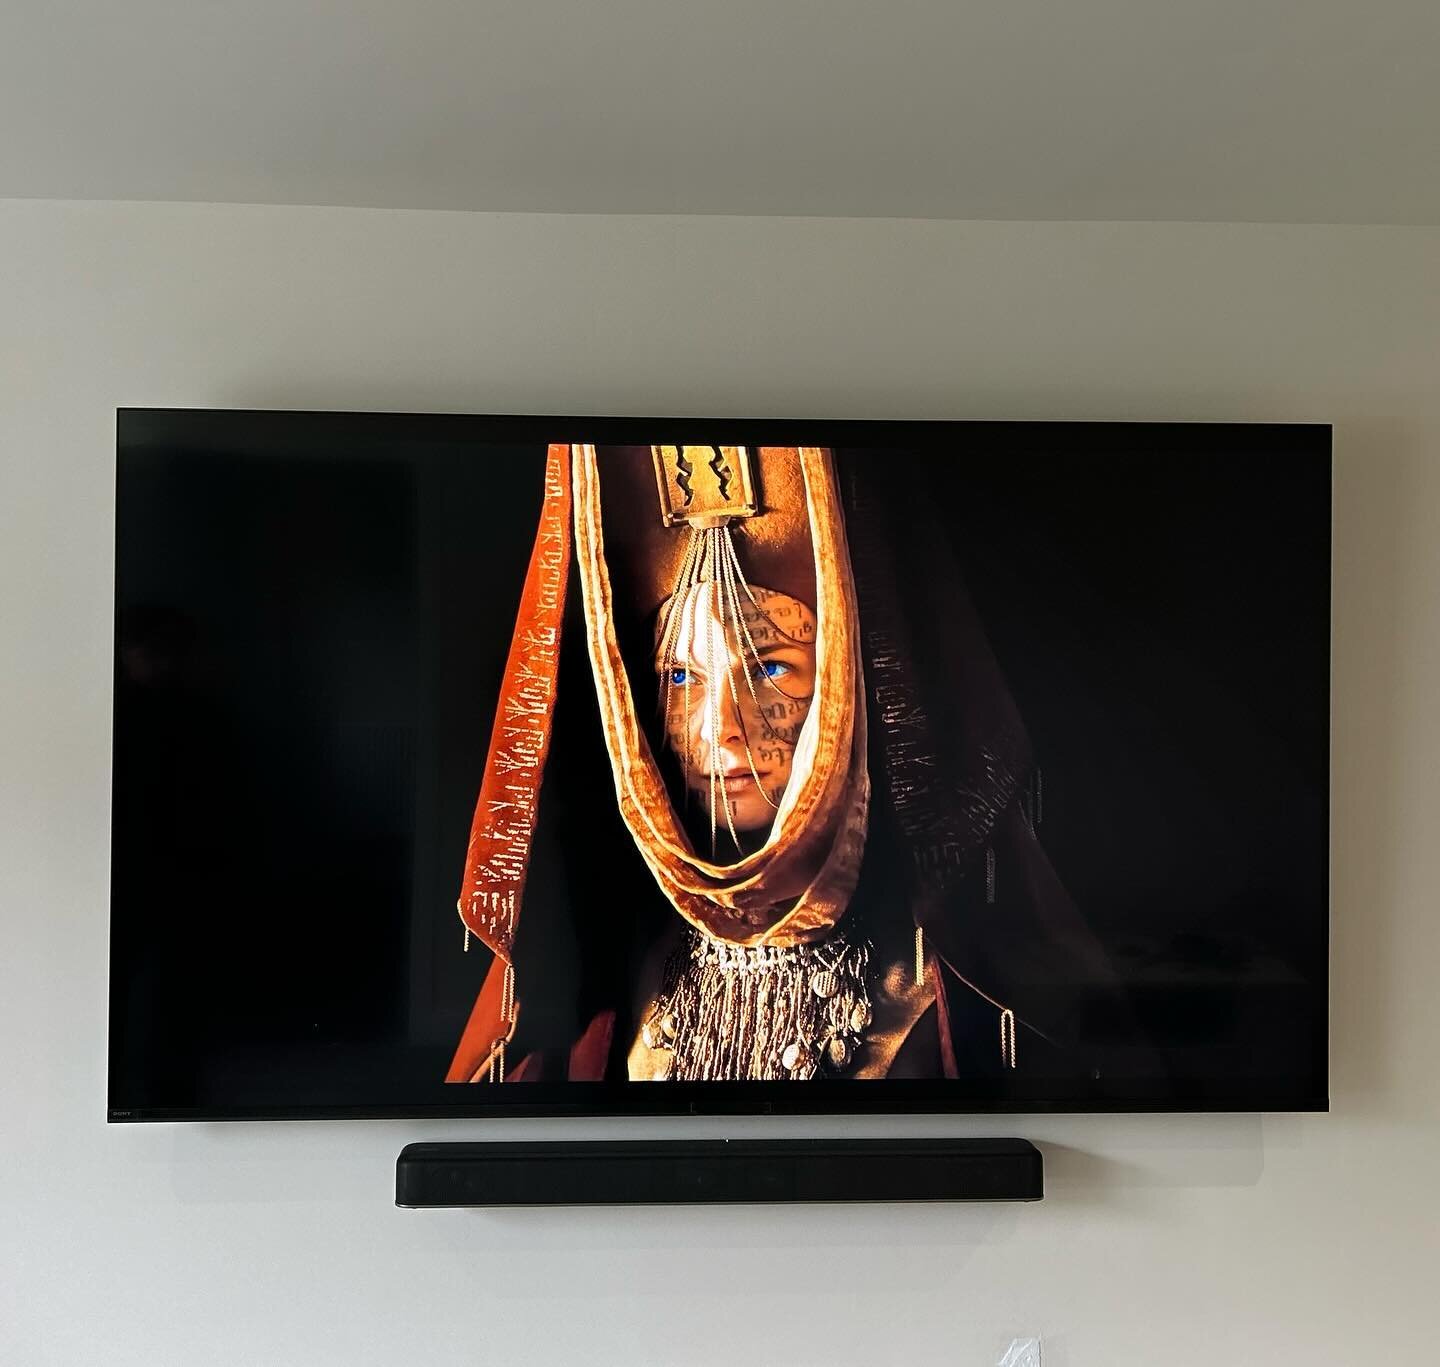 Today we installed this 75&rdquo; Sony television &amp; Soundbar in the living room for a customer in Wigston.

Our television wall mount service starts from just &pound;70.

Check us out at www.ultravision.info
Or call Pete on 07904 487 426

#tvwall